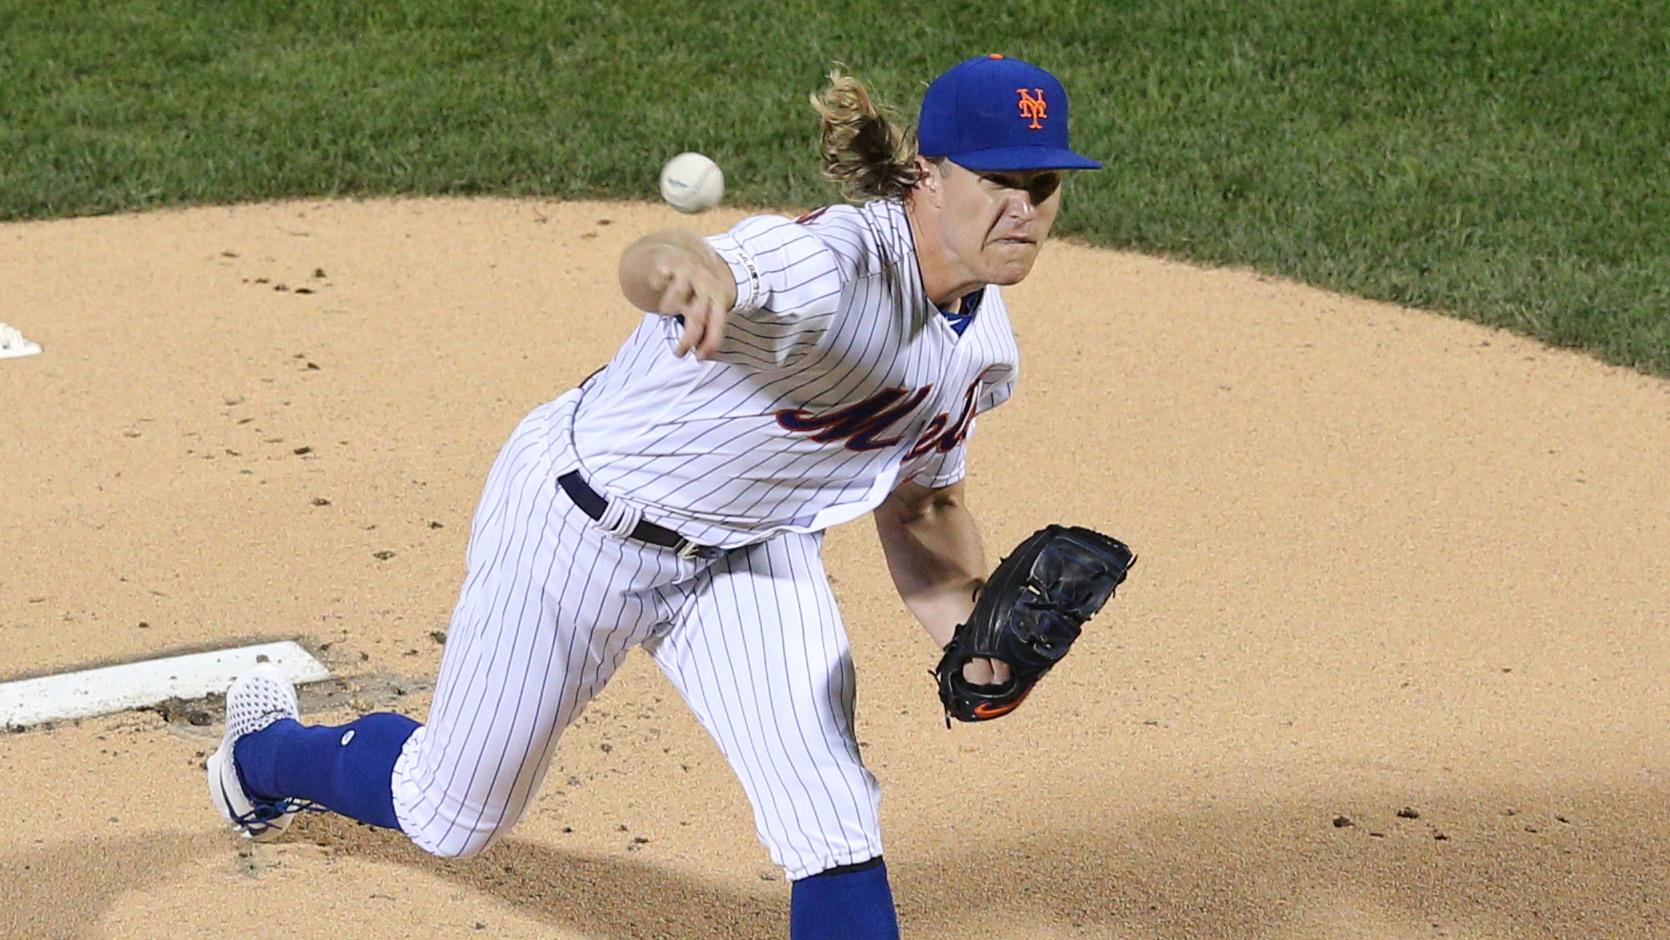 Sep 24, 2019; New York City, NY, USA; New York Mets starting pitcher Noah Syndergaard (34) pitches against the Miami Marlins during the first inning at Citi Field. / Brad Penner-USA TODAY Sports